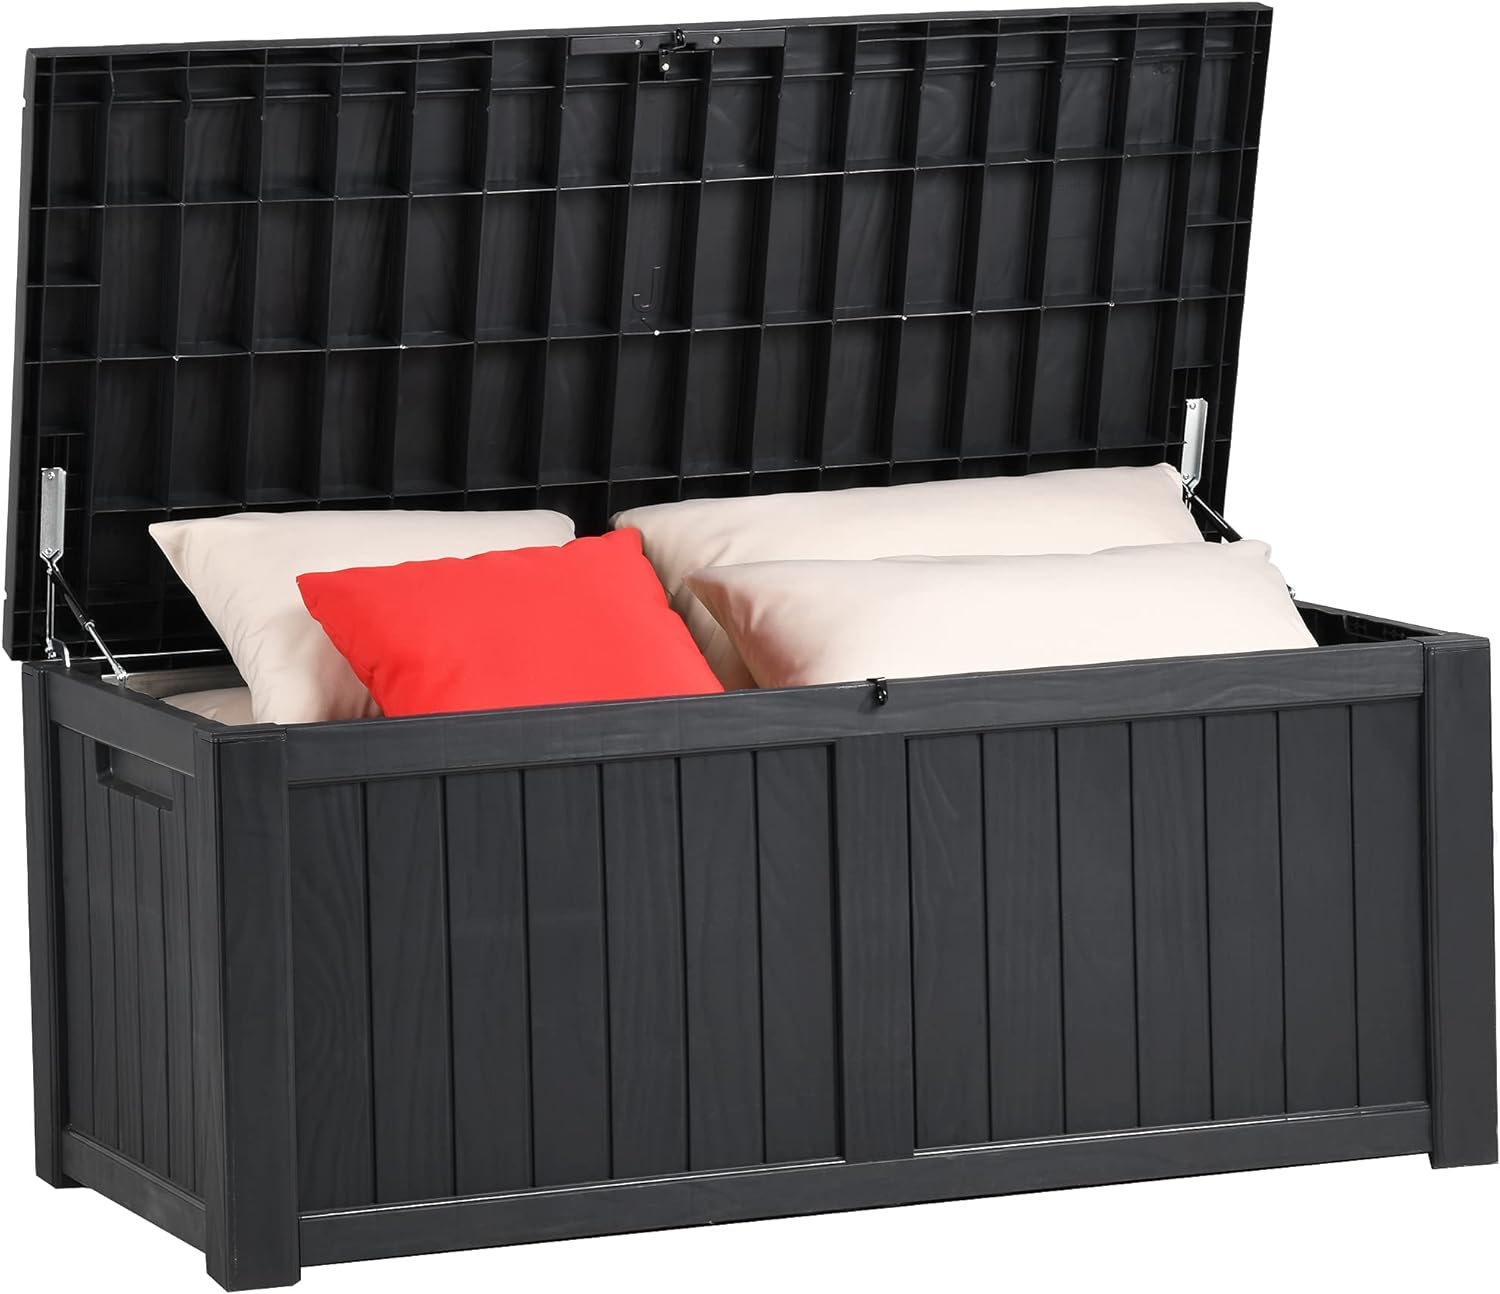 Spacious Elegance: The Ultimate Patio Storage Deck Boxes